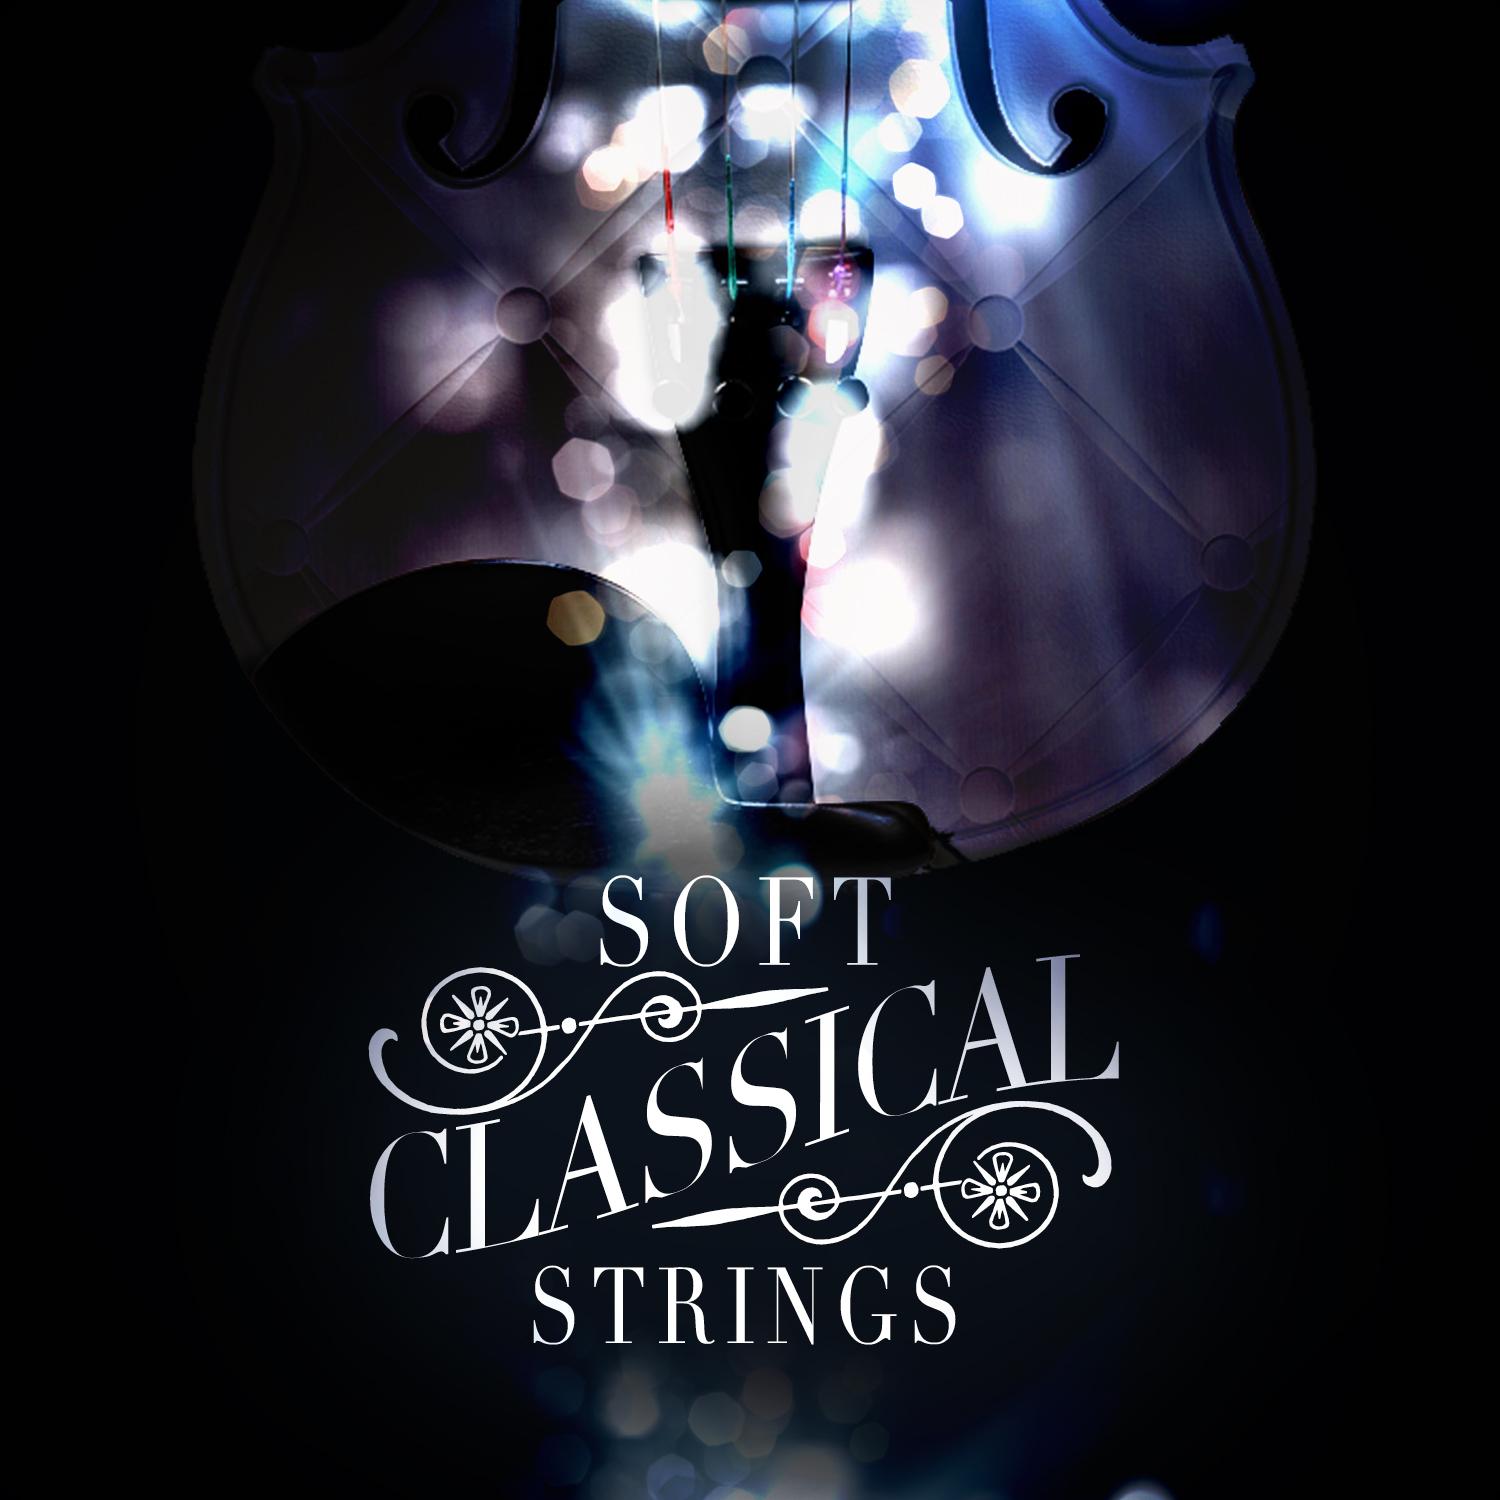 Soft Classical Strings